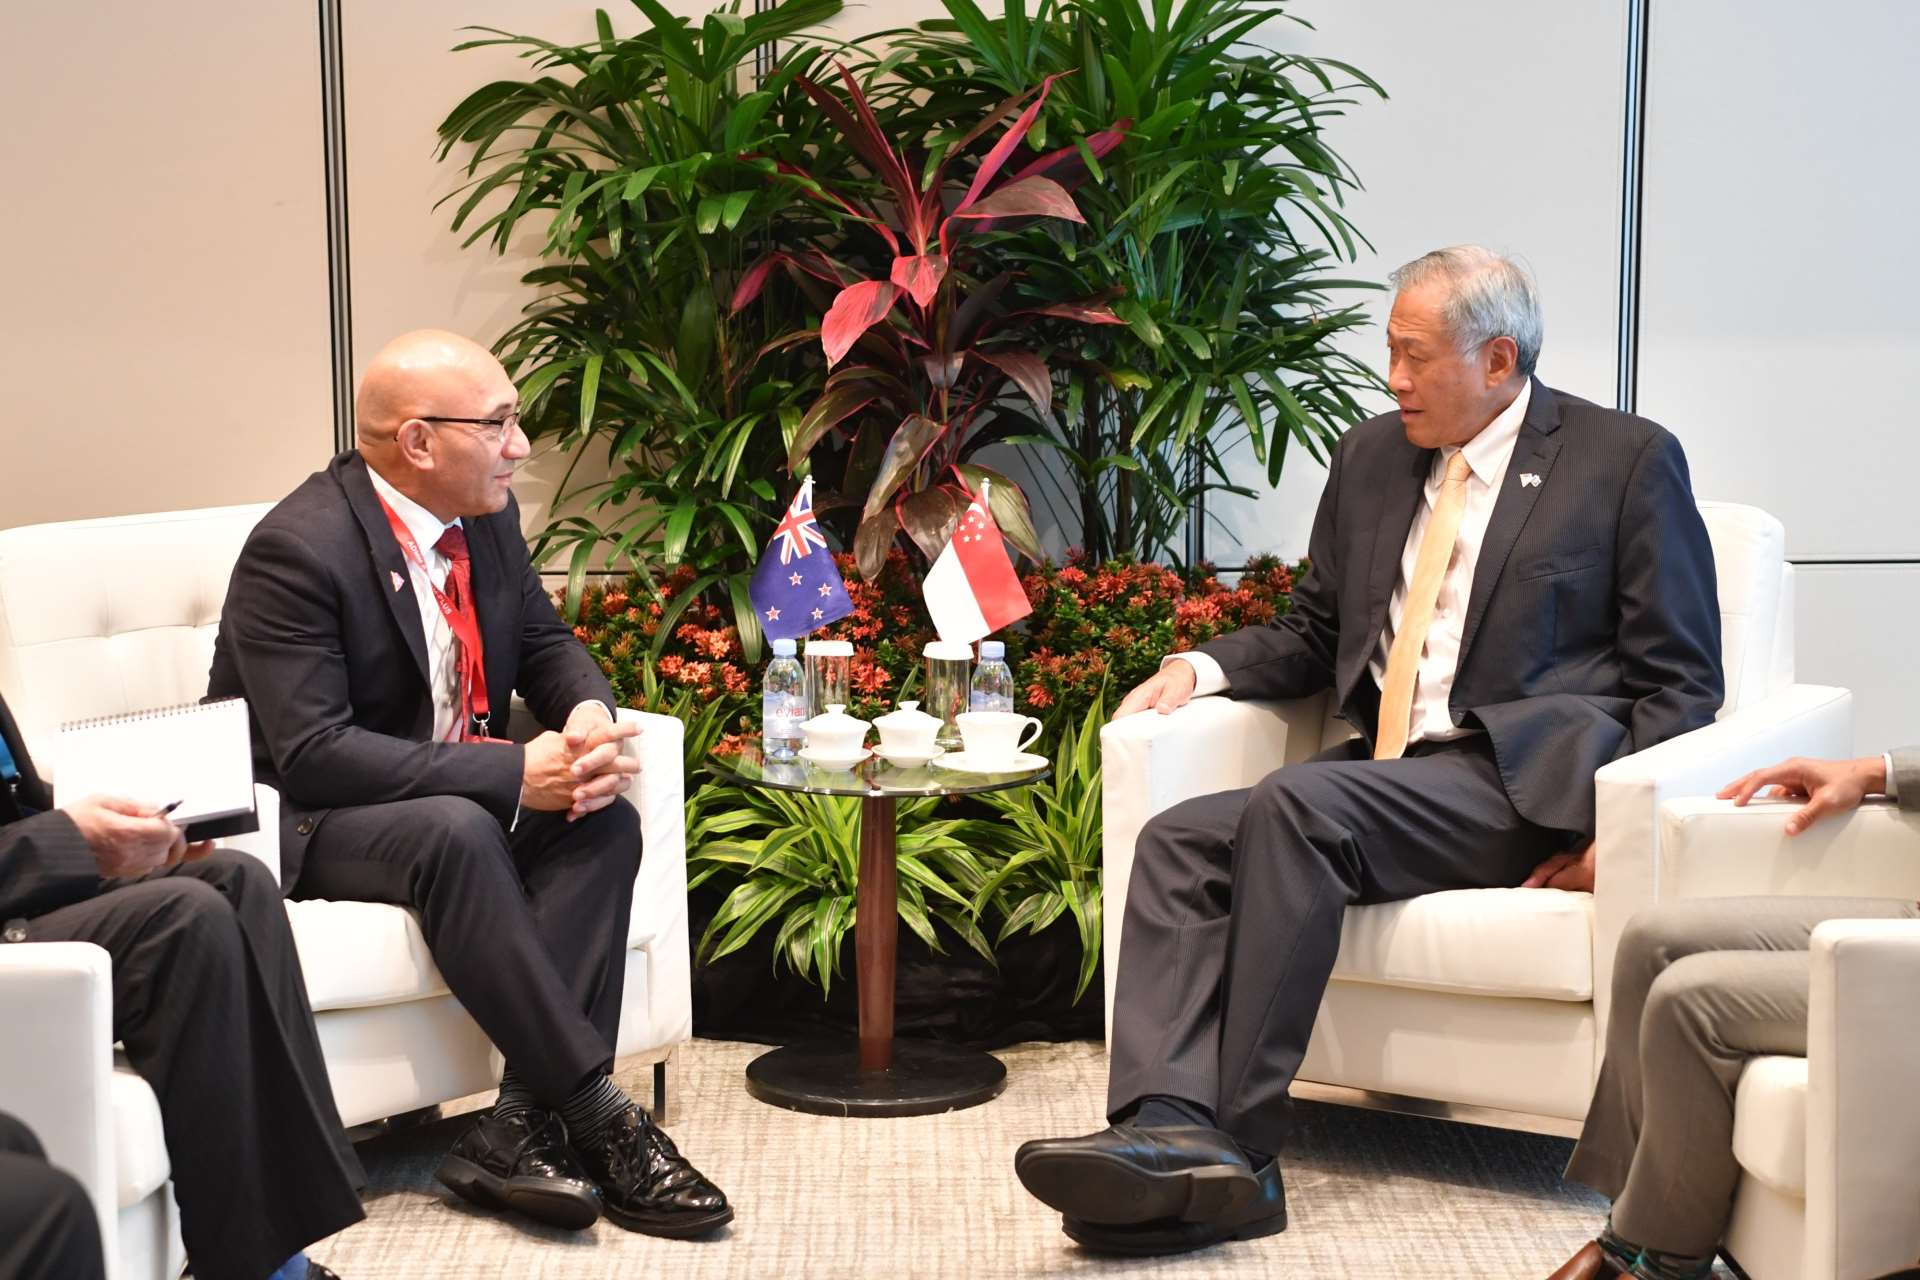 Singapore's Minister for Defence Dr Ng Eng Hen (right) meeting with New Zealand's Minister of Defence Ron Mark this afternoon on the sidelines of the 5th ADMM-Plus.